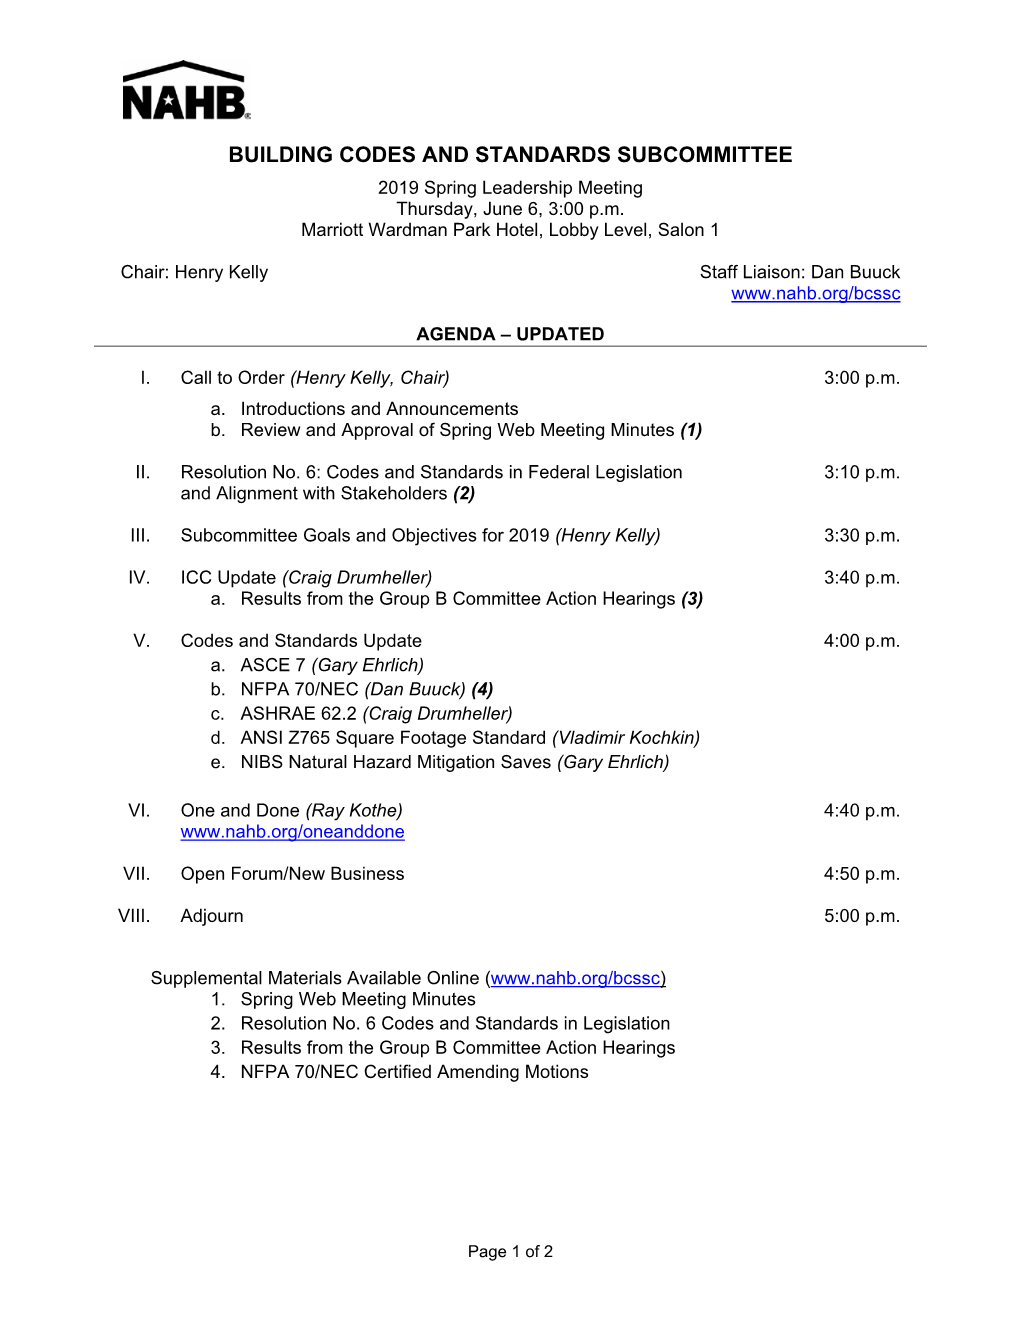 BUILDING CODES and STANDARDS SUBCOMMITTEE 2019 Spring Leadership Meeting Thursday, June 6, 3:00 P.M